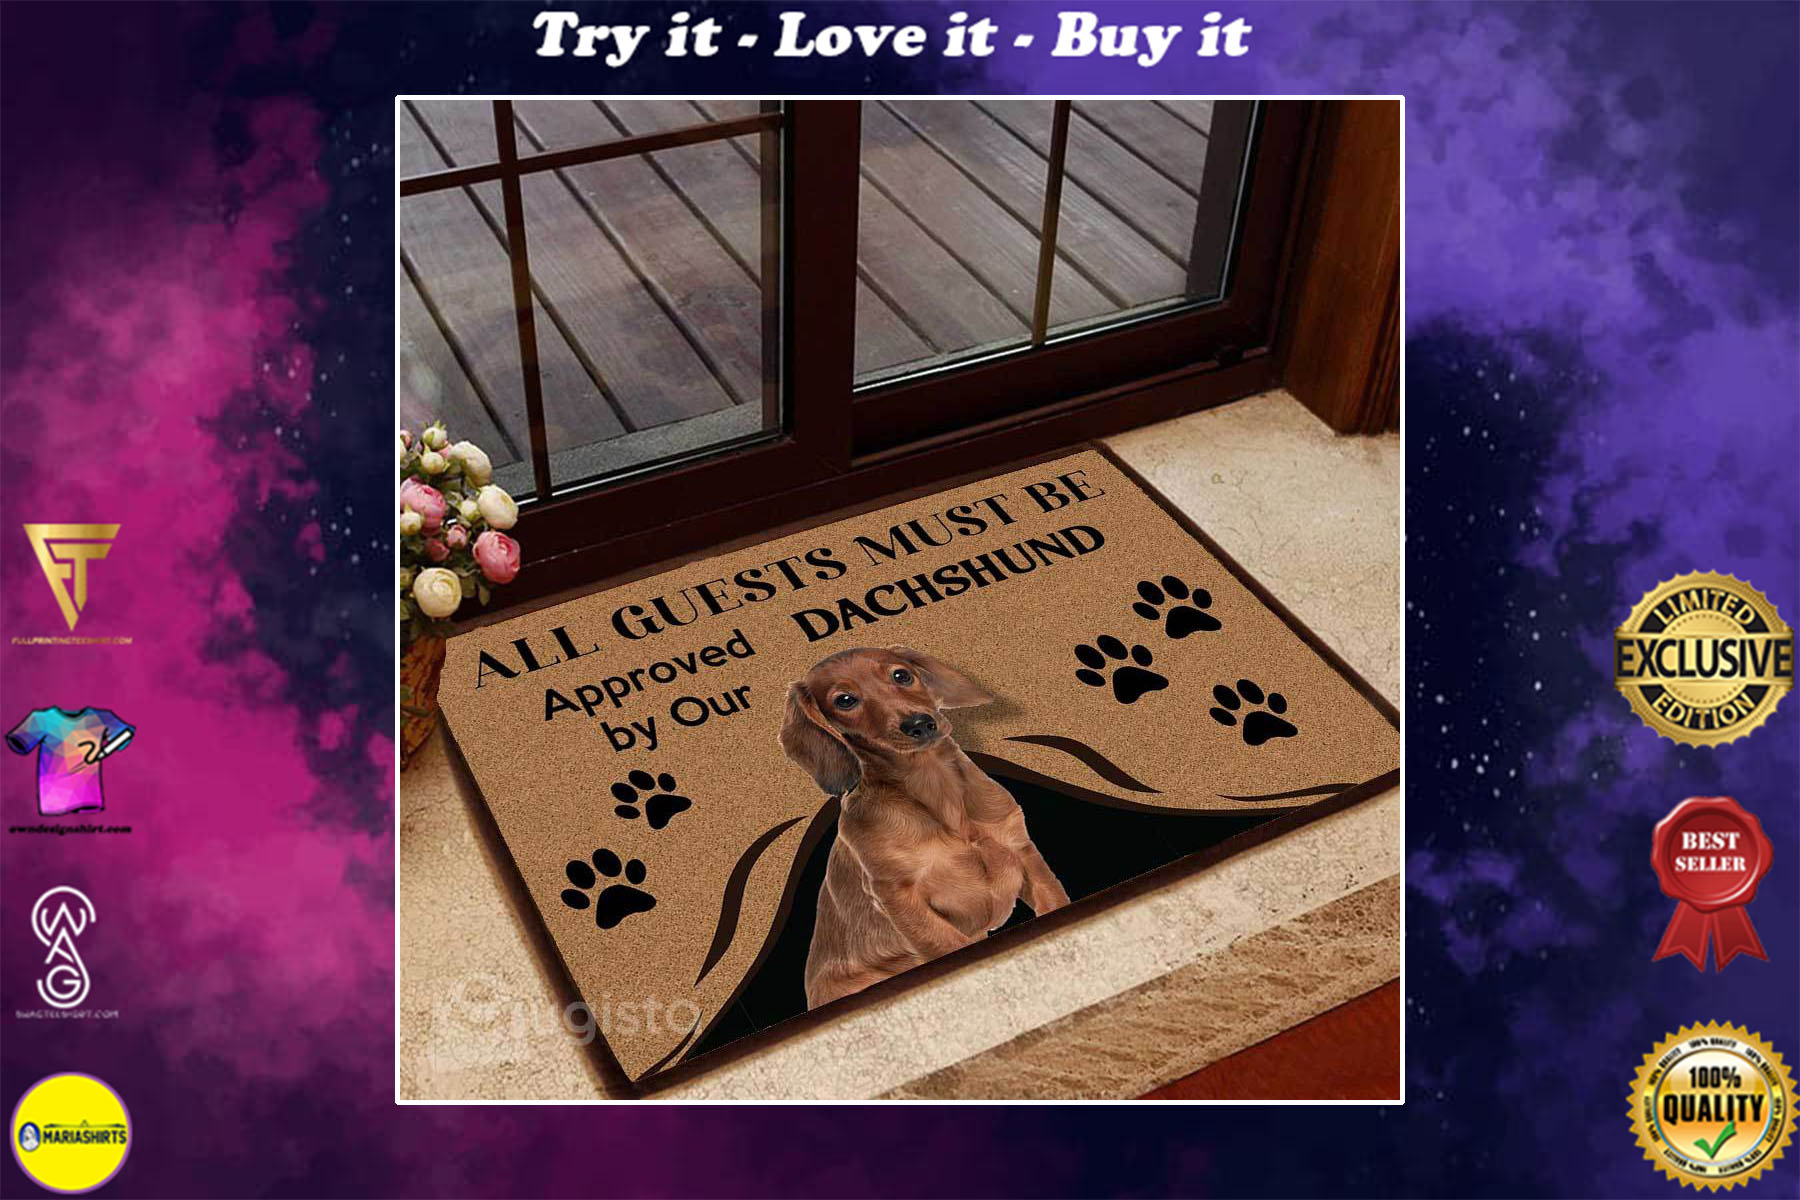 [special edition] all guests must be approved by our dachshund doormat- maria